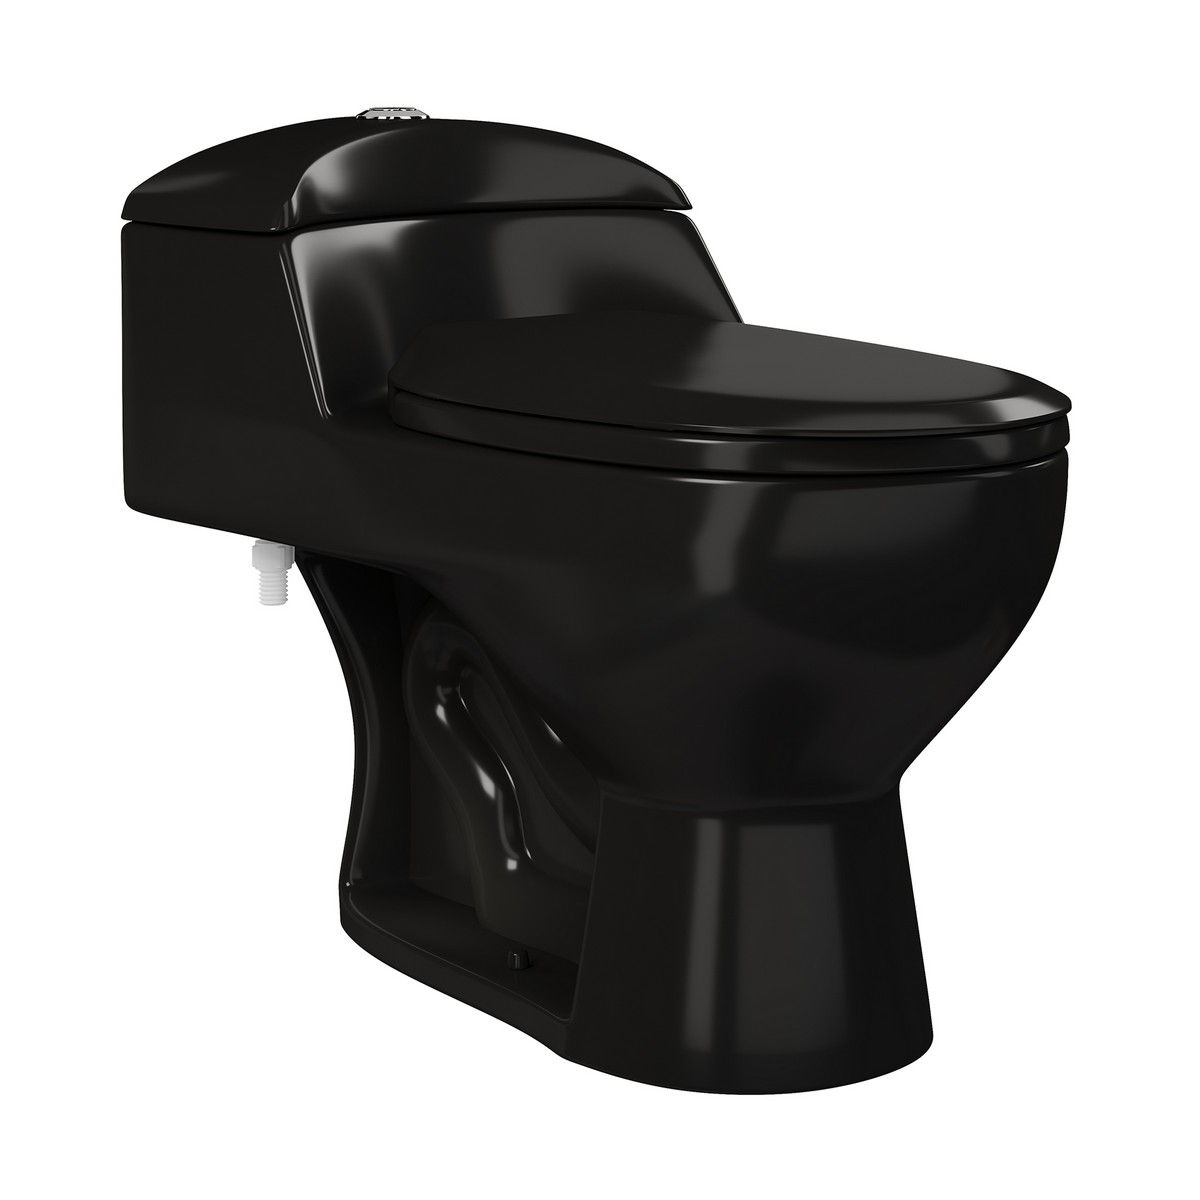 SWISS MADISON SM-1T803GB CHATEAU 1.1/1.6 GPF DUAL FLUSH ONE-PIECE ELONGATED TOILET IN GLOSSY BLACK